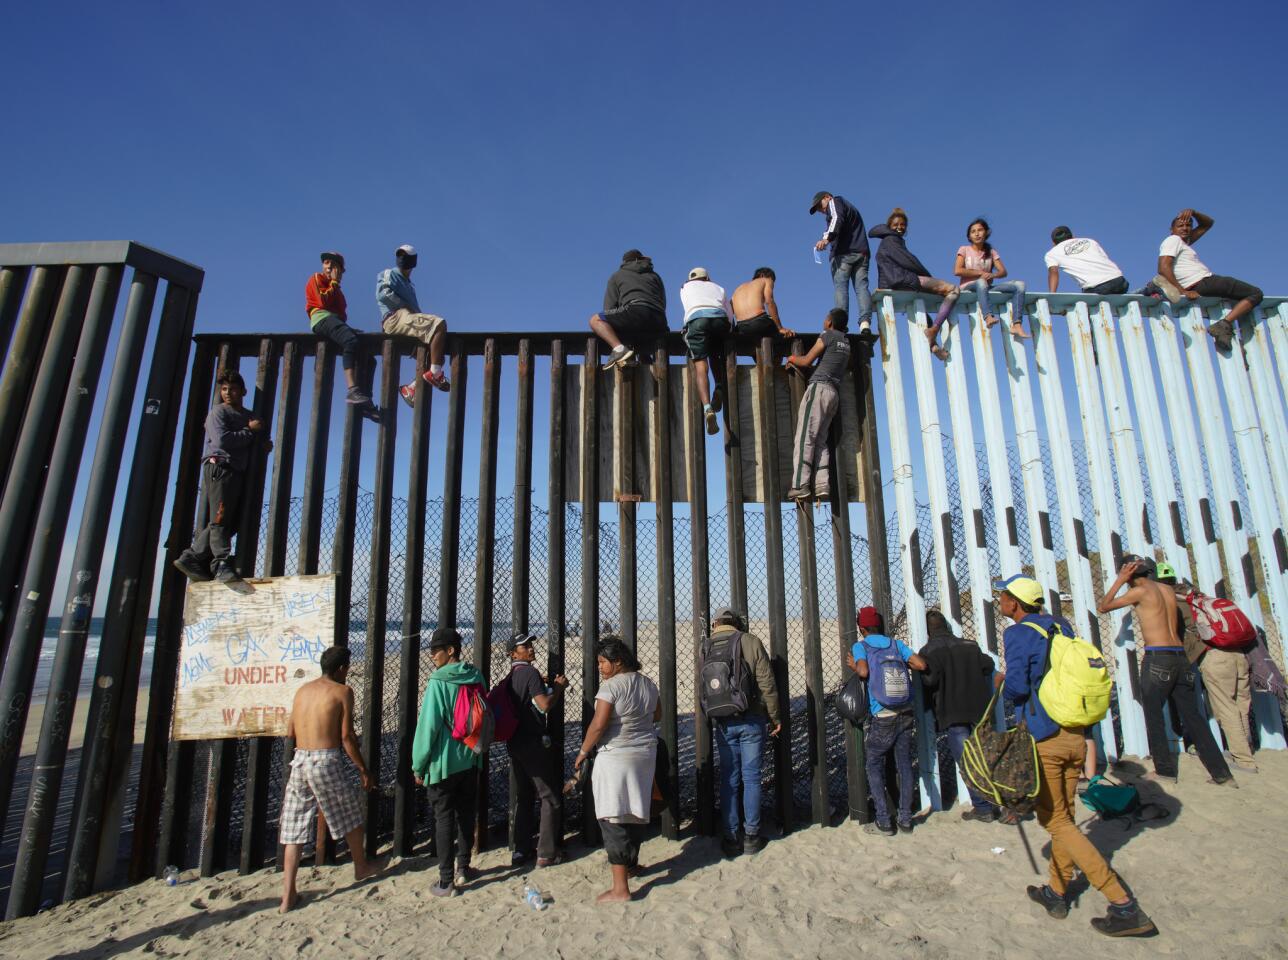 On arrival to the U.S. Mexico border, many climbed the fence with U.S. Border Patrol on the north side of the fence observing.